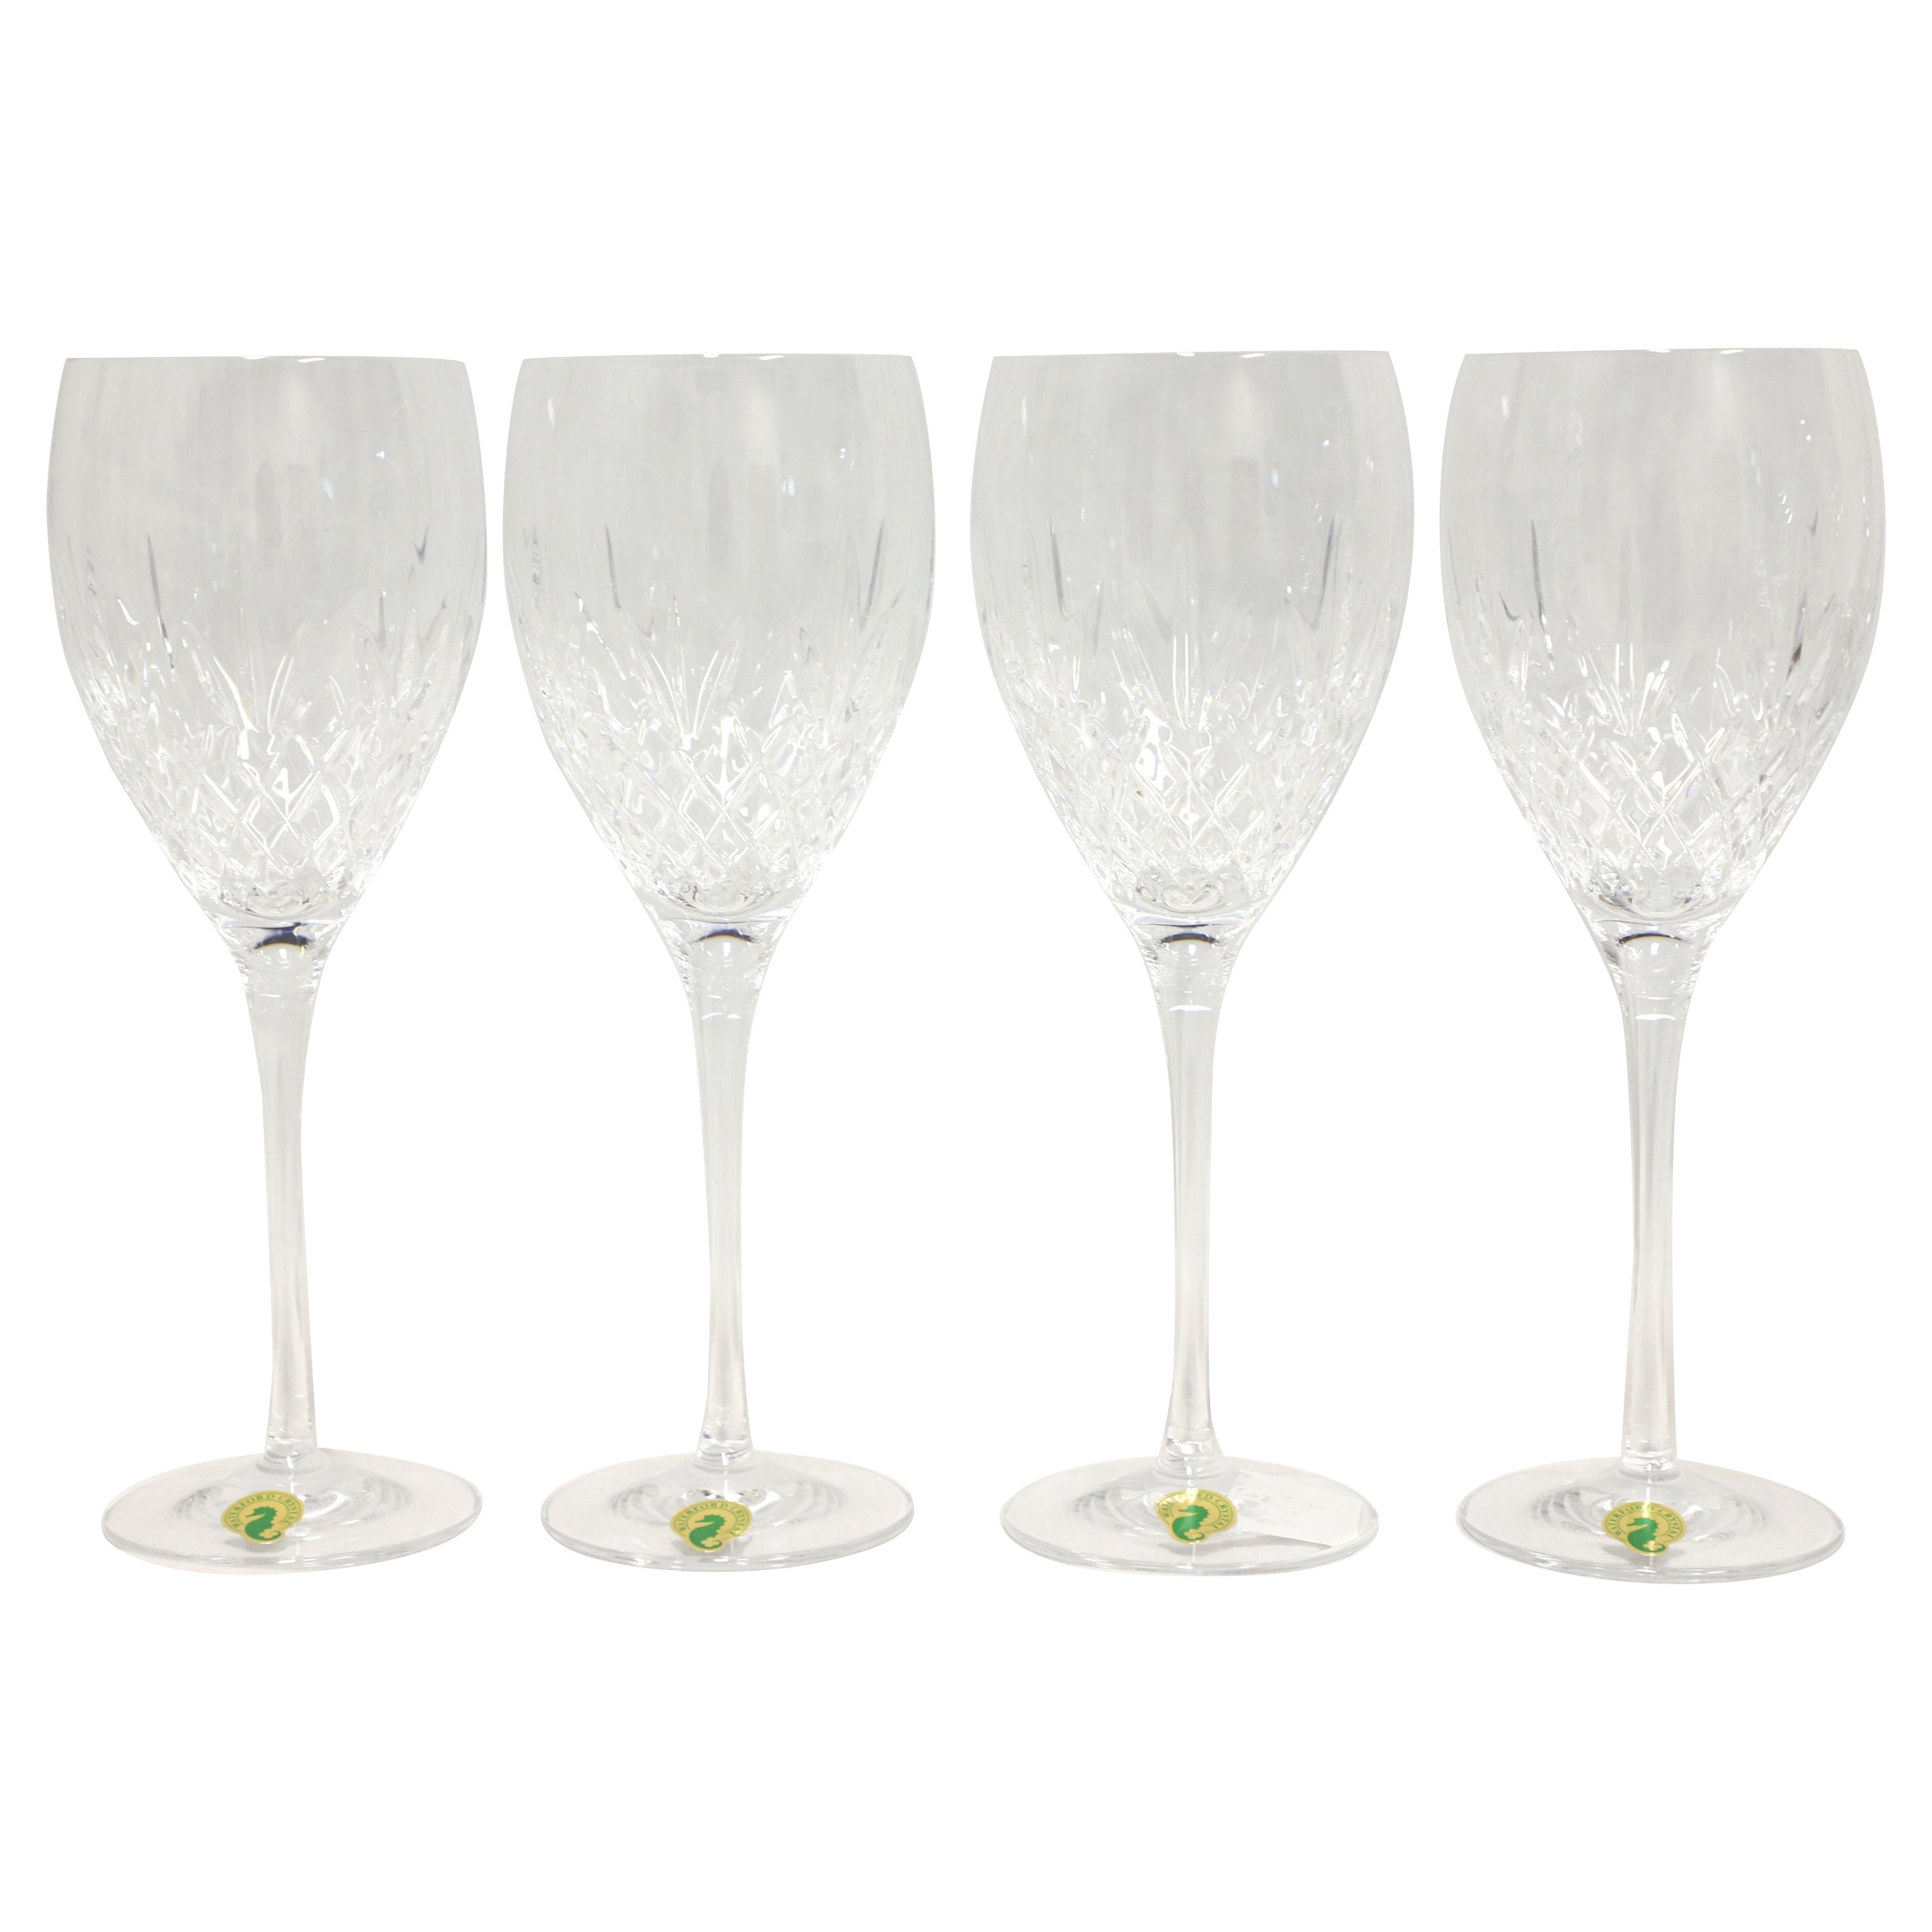 Waterford Crystal 9.5" Plaza Goblet - Set of 4 *New in Open Box* (Nouveau dans une boîte ouverte)